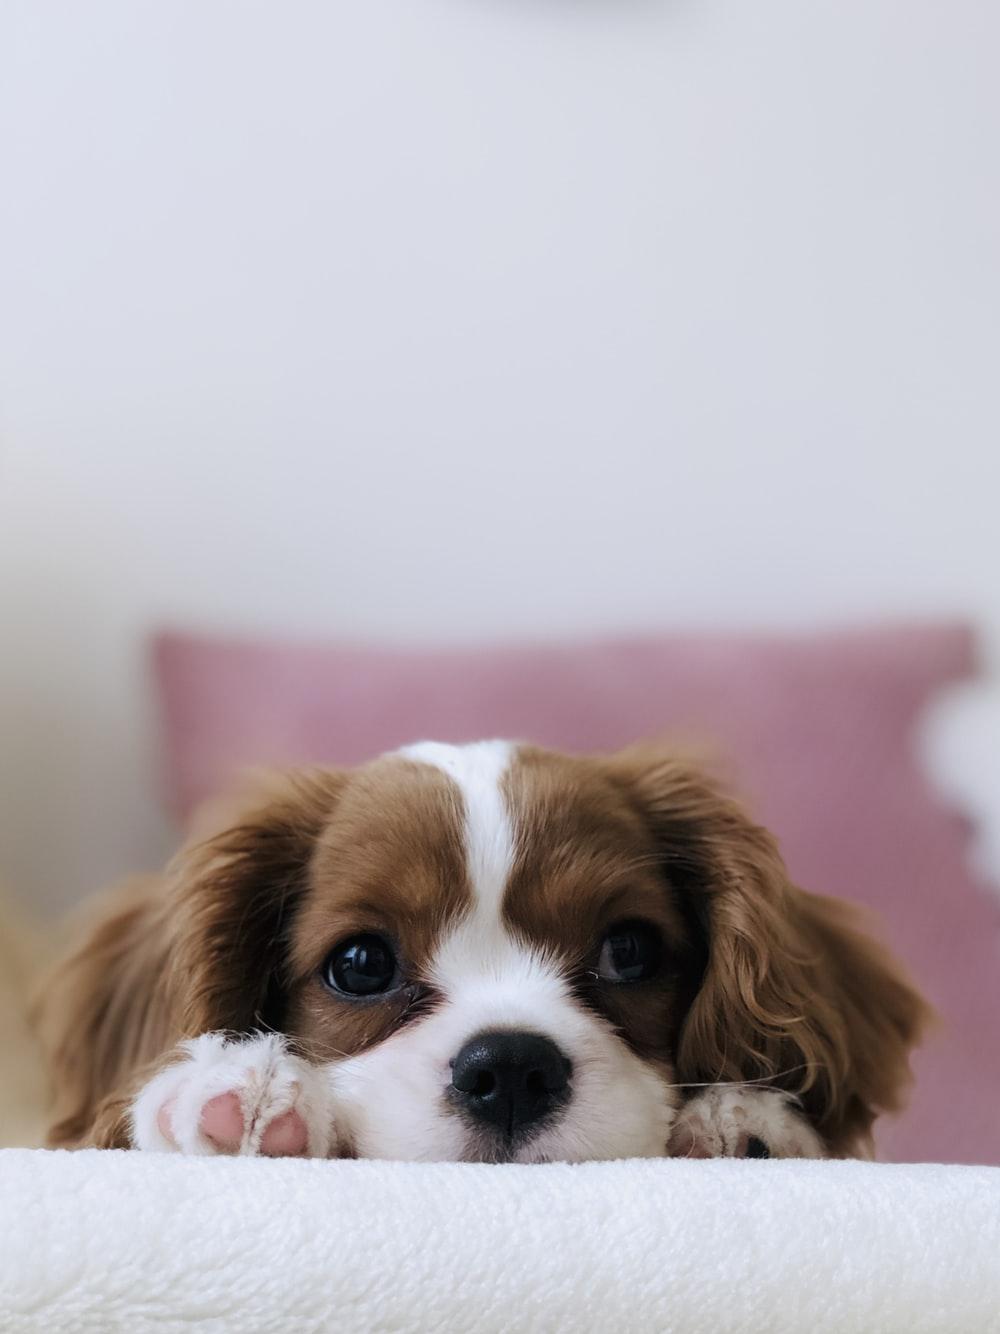 Adorable Puppy Picture. Download Free Image of Puppies